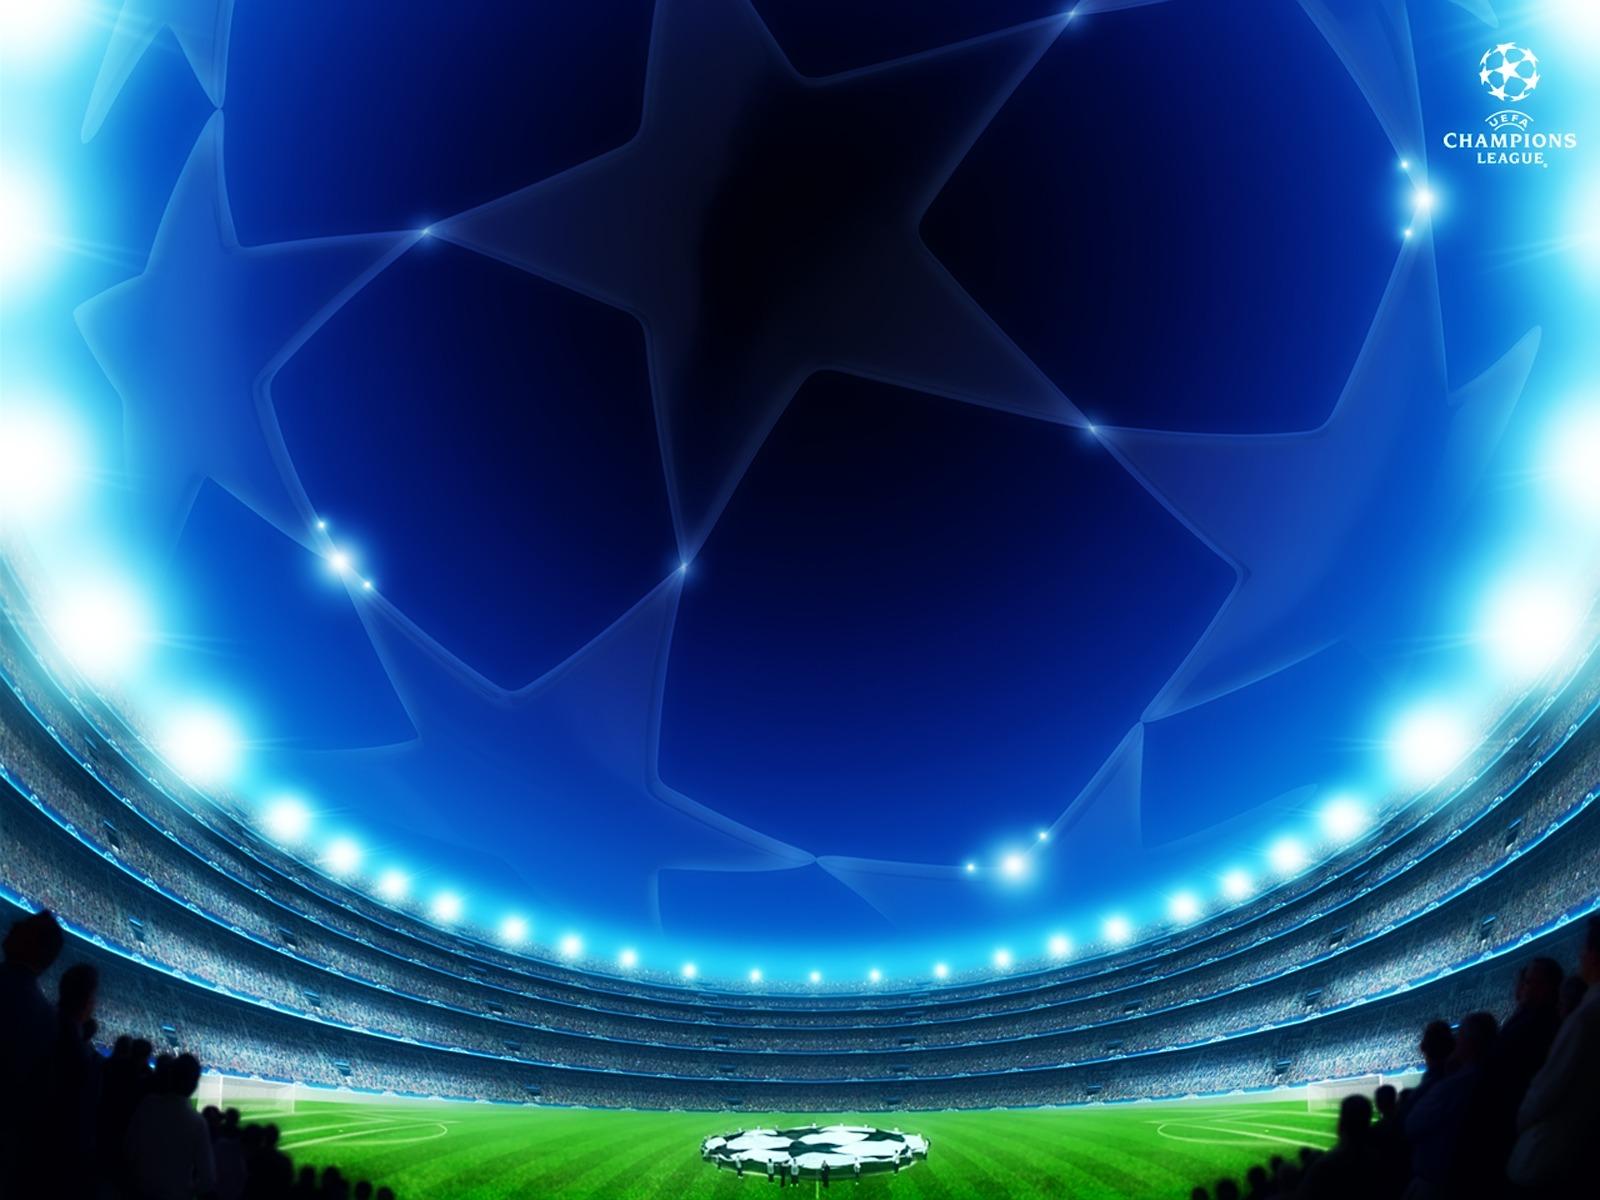 UEFA Champions League Wallpaper Football Sports Wallpaper in jpg format for free download